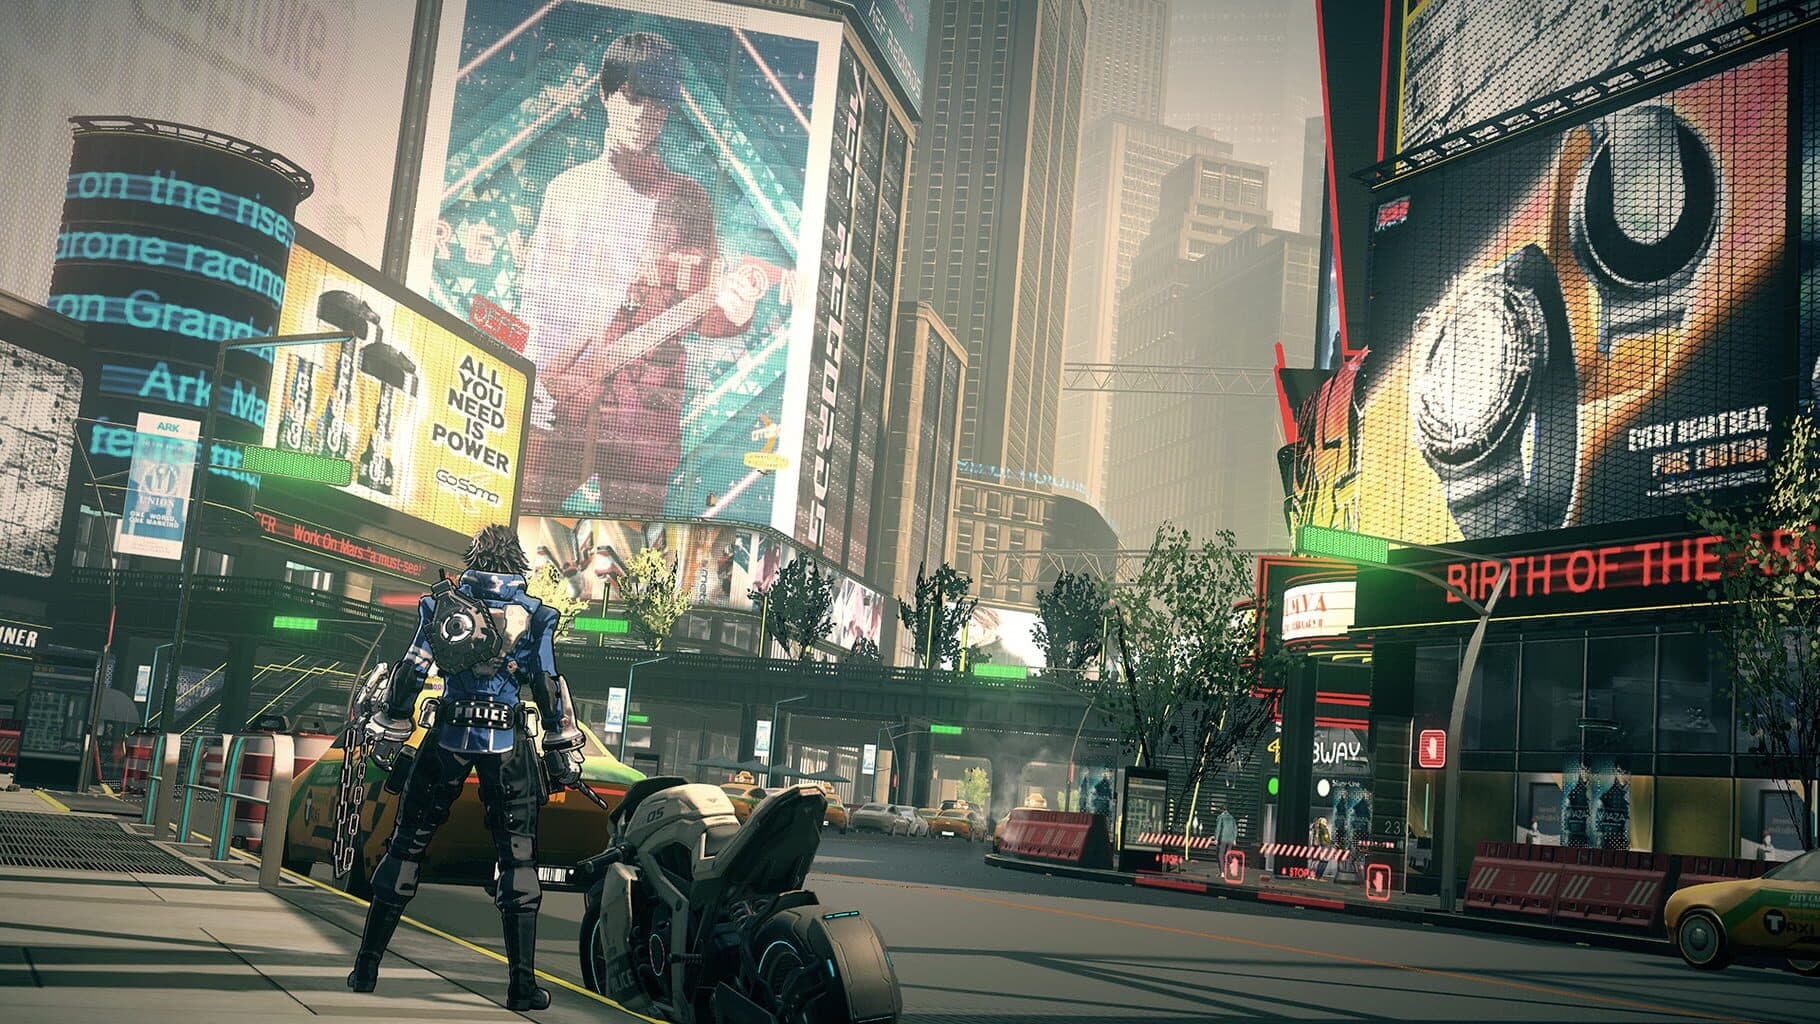 Astral Chain Image